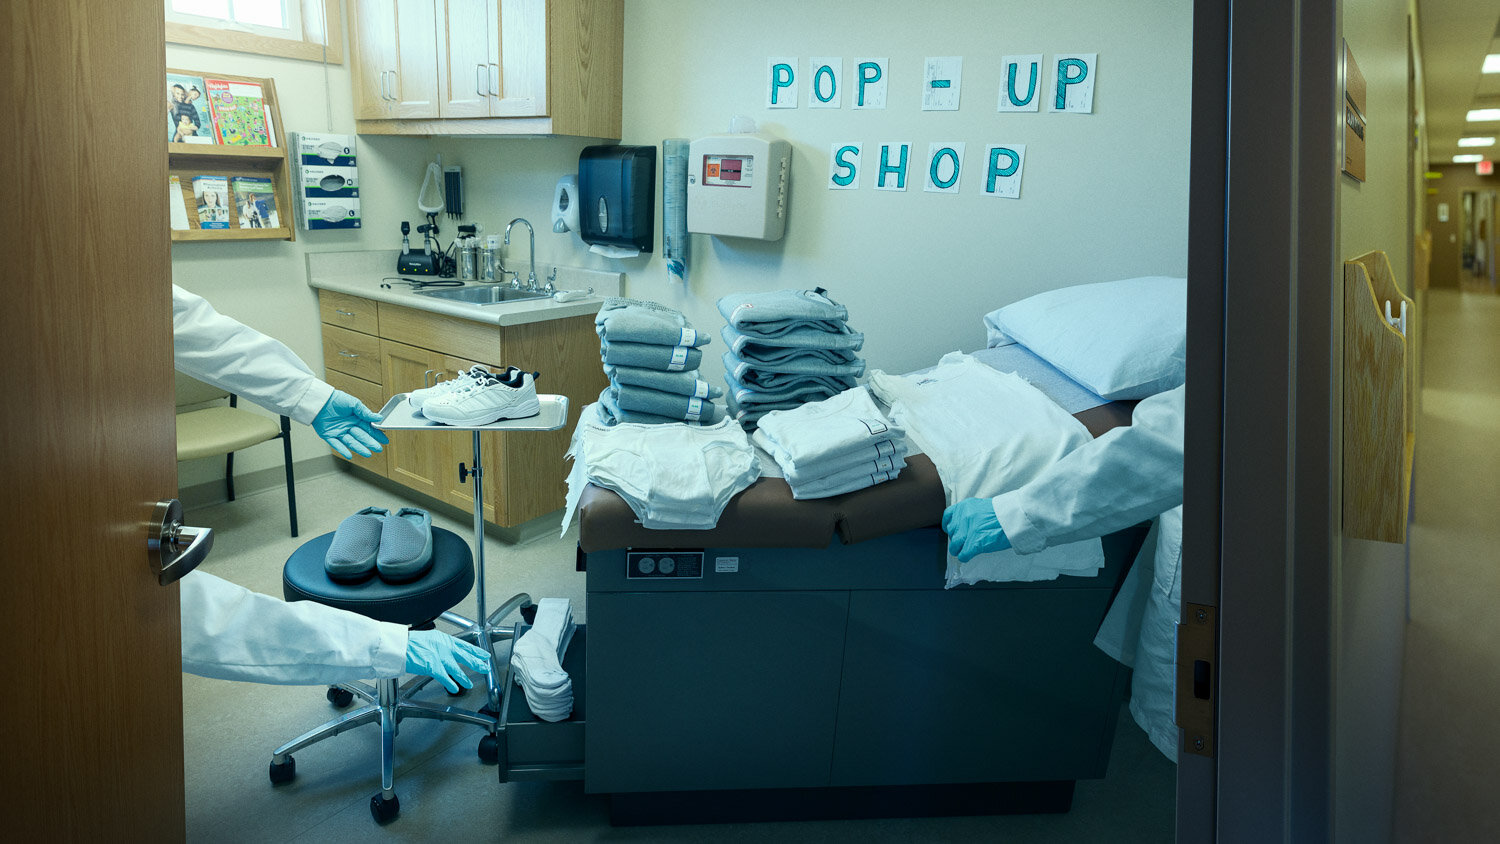 editorial product photography: sterile hospital room is set up as pop-up shop for generic clothing for the disabled. 